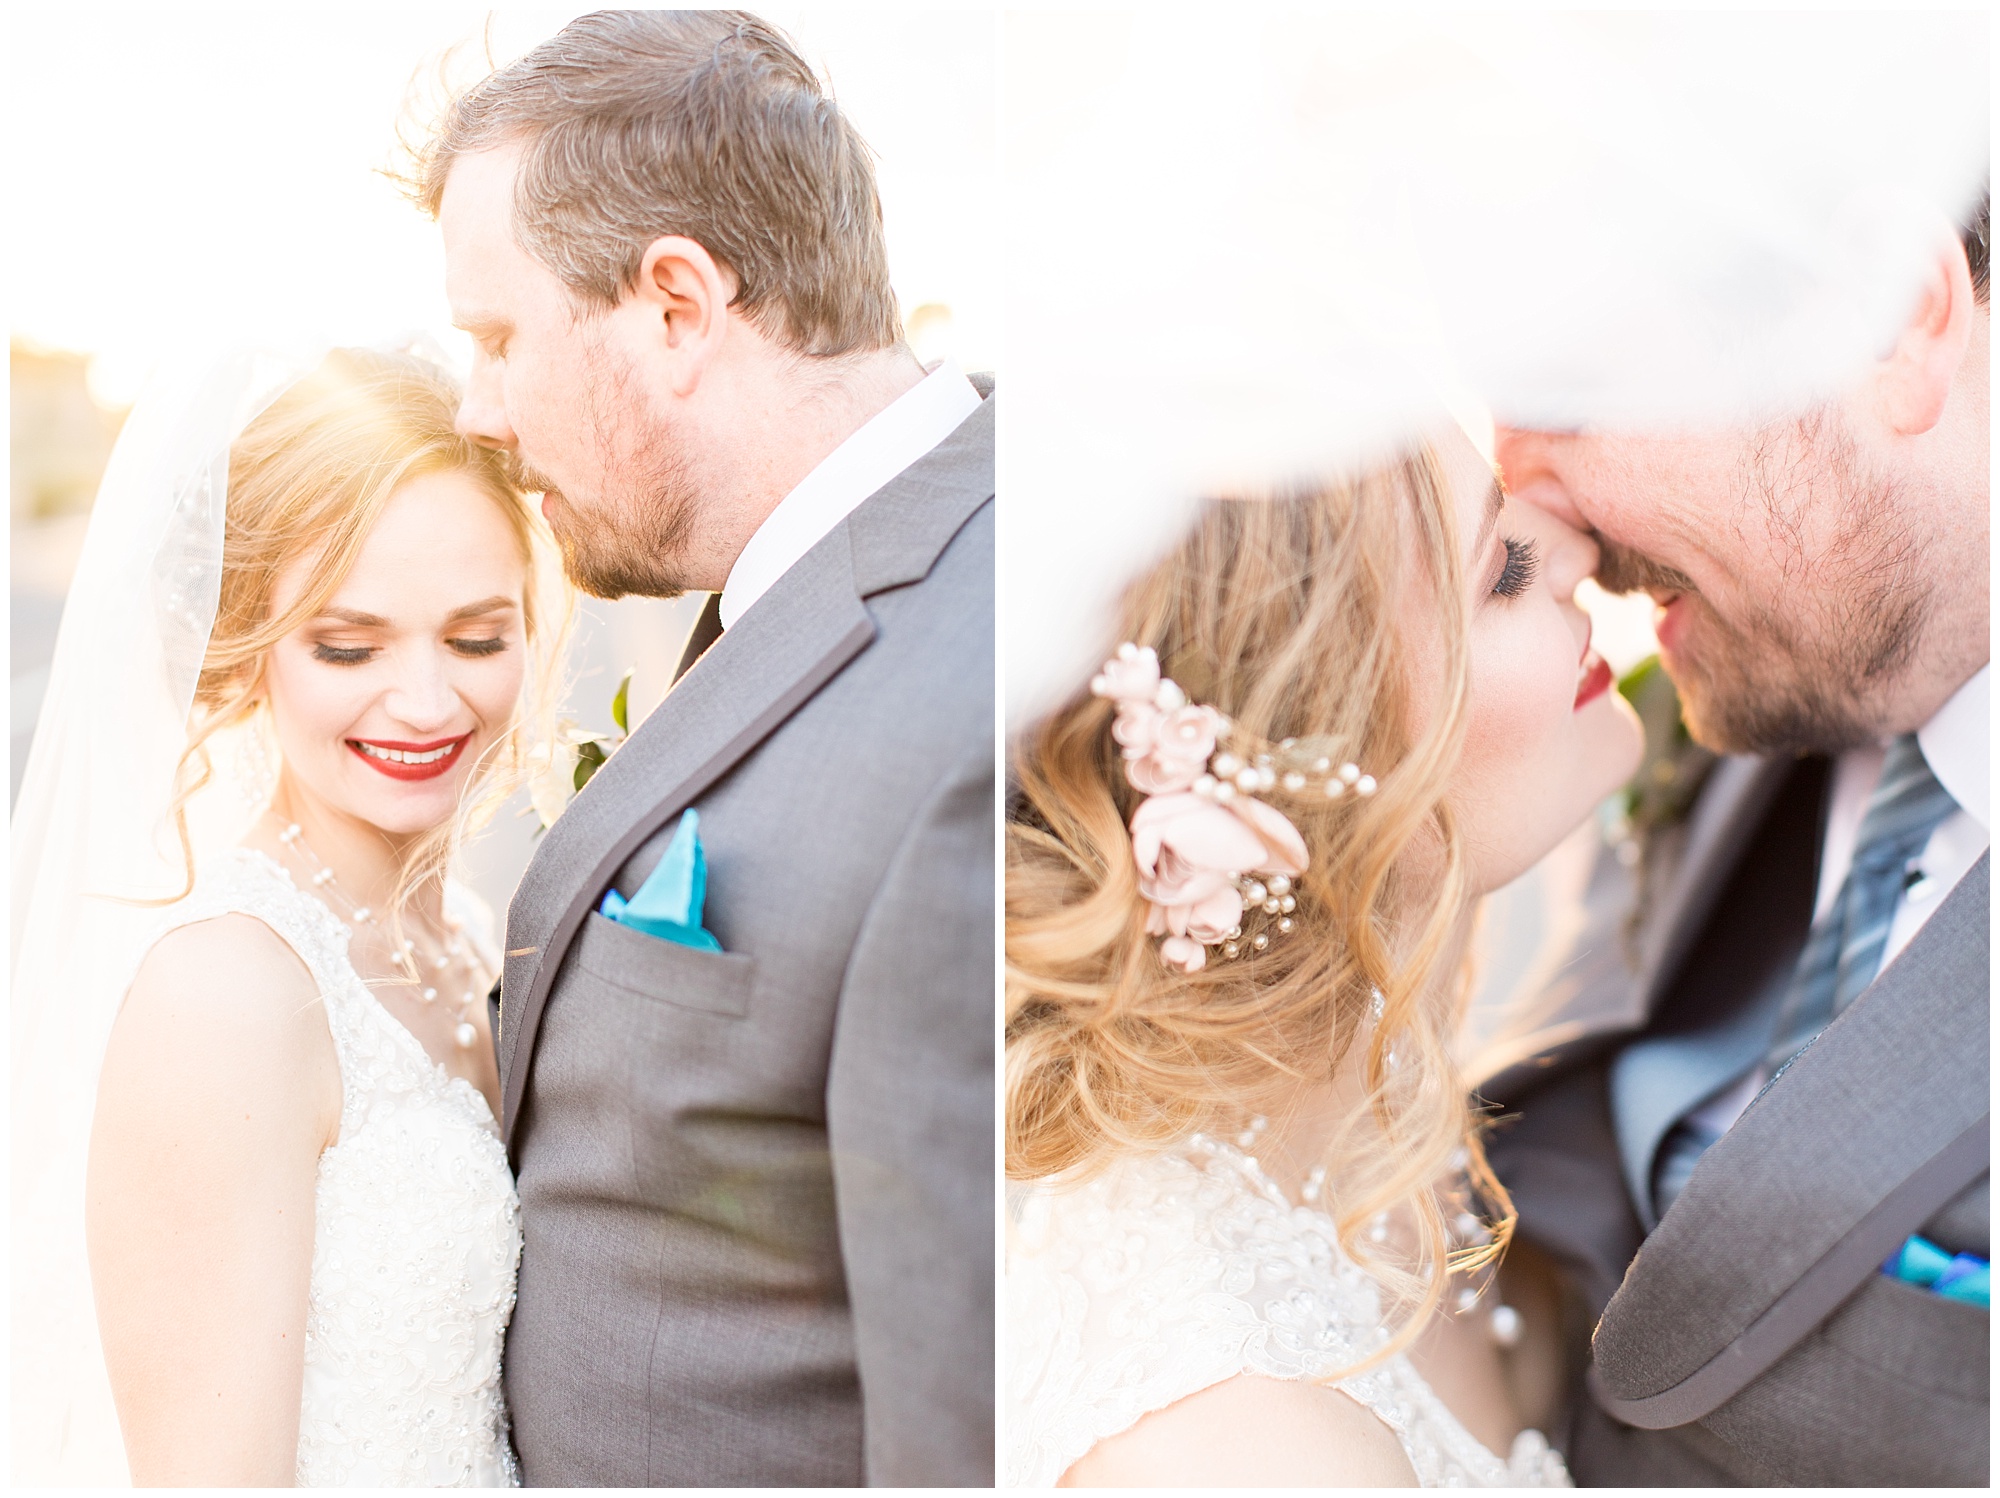 Old Town Wedding and Event Center : Trevor and Caite